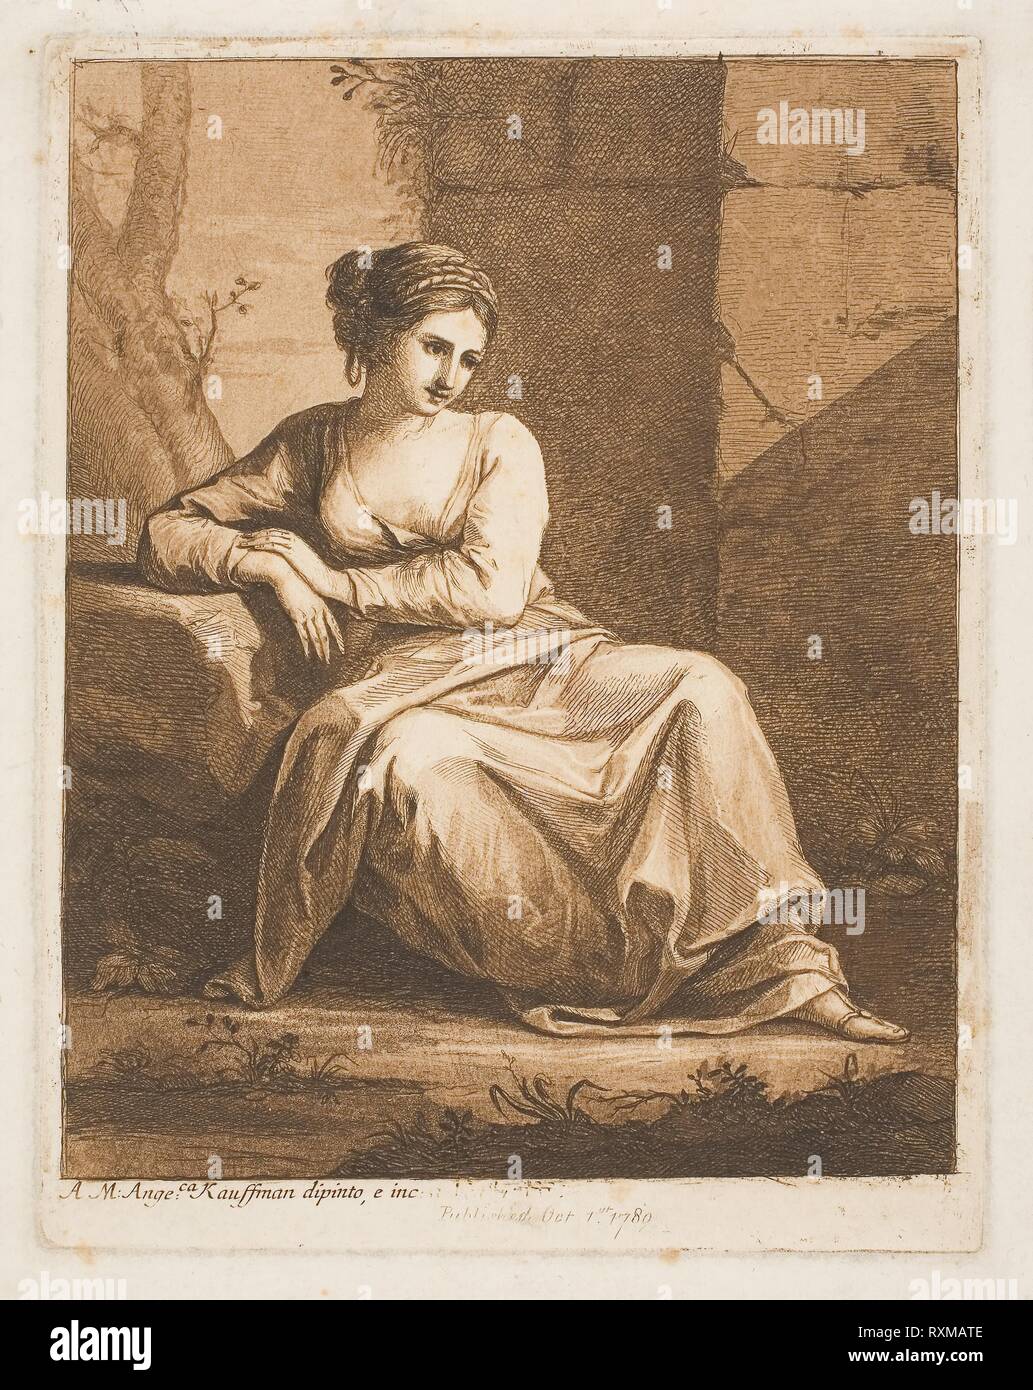 The Muse. Angelica Kauffmann; Swiss, 1741-1807. Date: 1766. Dimensions: 195 x 155 mm (image); 215 x 165 mm (plate); 235 x 185 mm (sheet). Etching with aquatint, on ivory laid paper. Origin: Switzerland. Museum: The Chicago Art Institute. Stock Photo